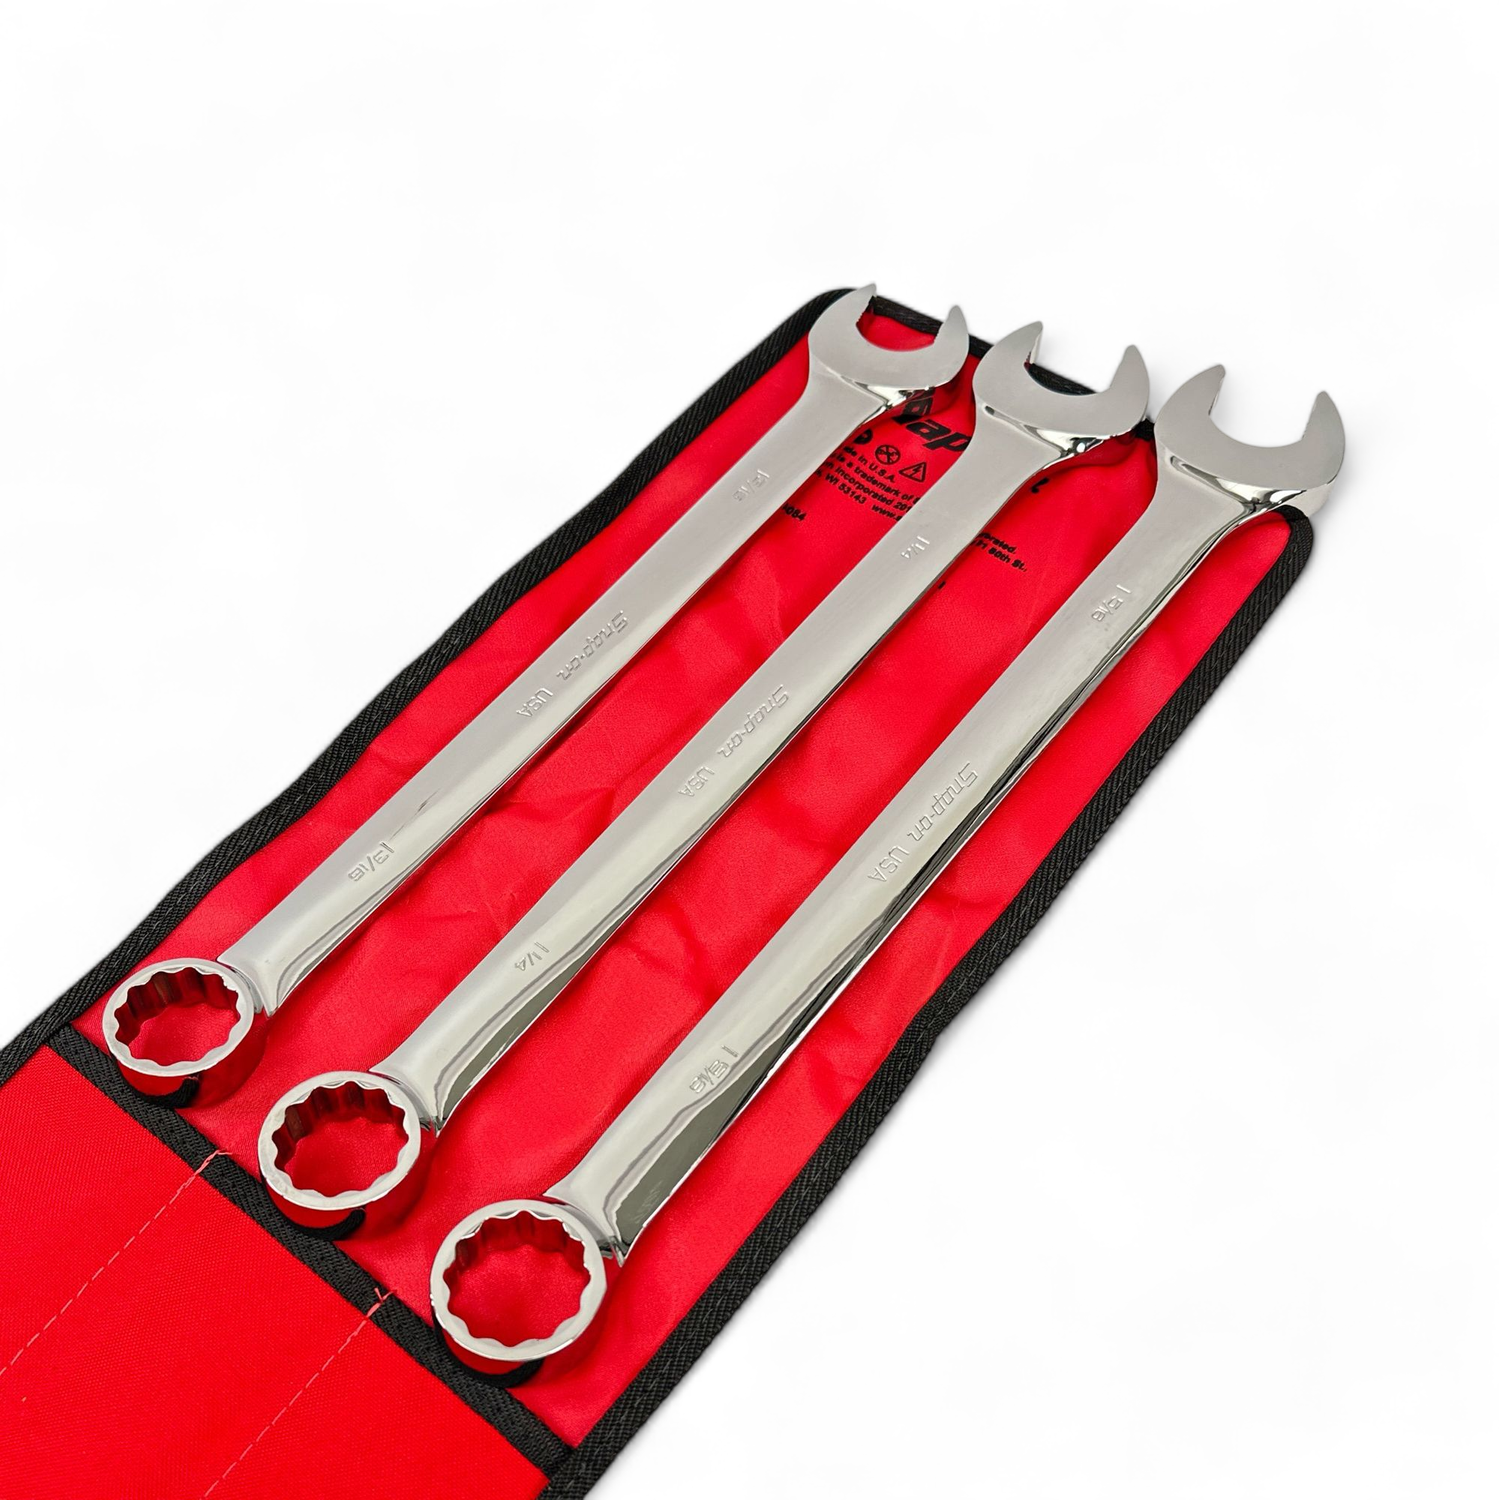 Snap On 3 pc 12-Point SAE Flank Drive® Plus Combination Wrench Set (1-3/16–1-5/16"), SOEX703K1